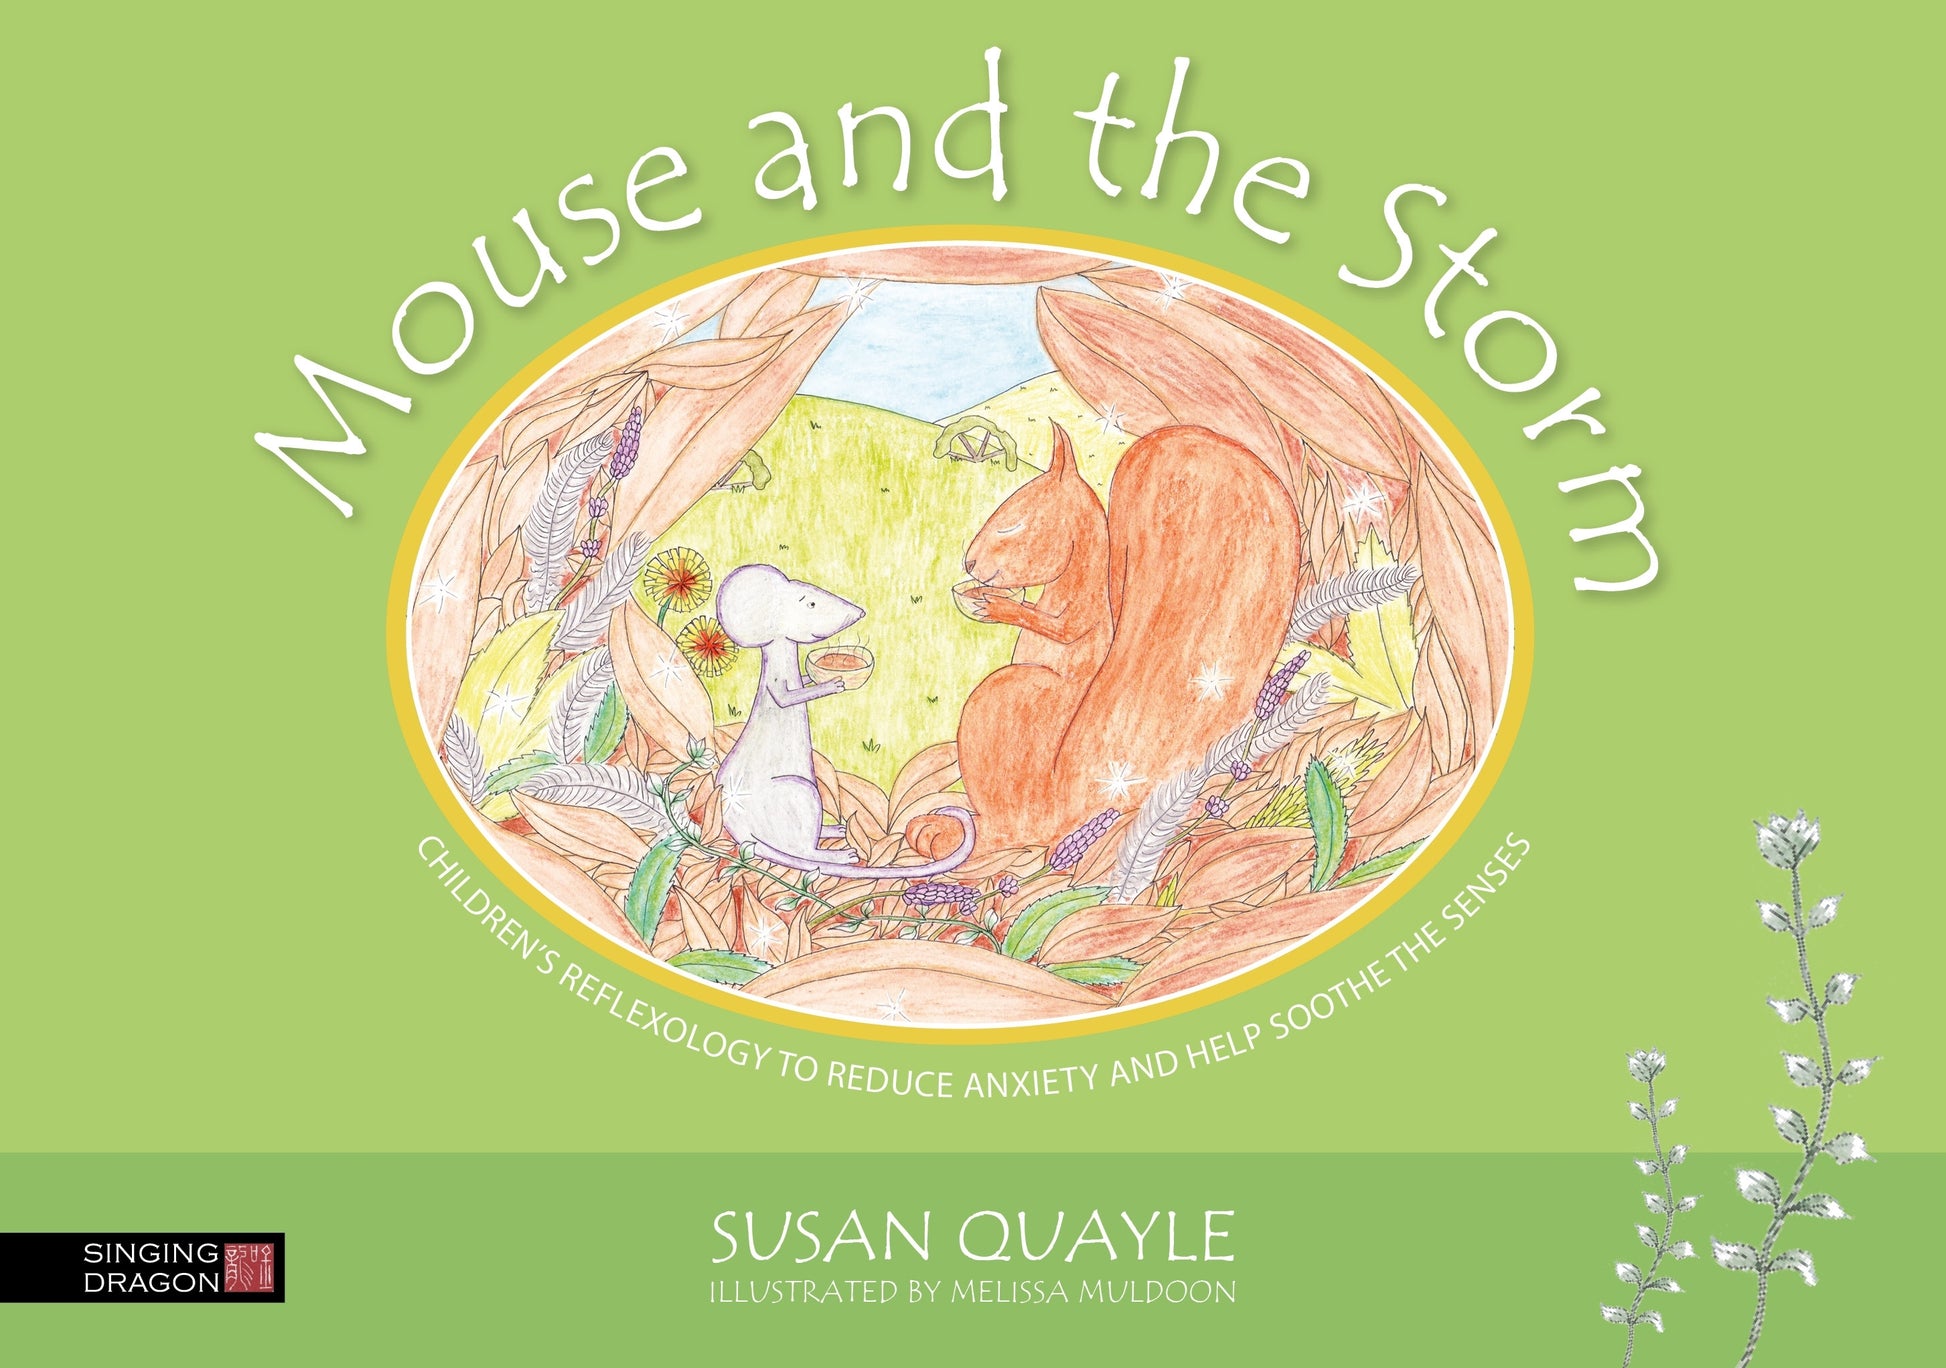 Mouse and the Storm by Susan Quayle, Melissa Muldoon